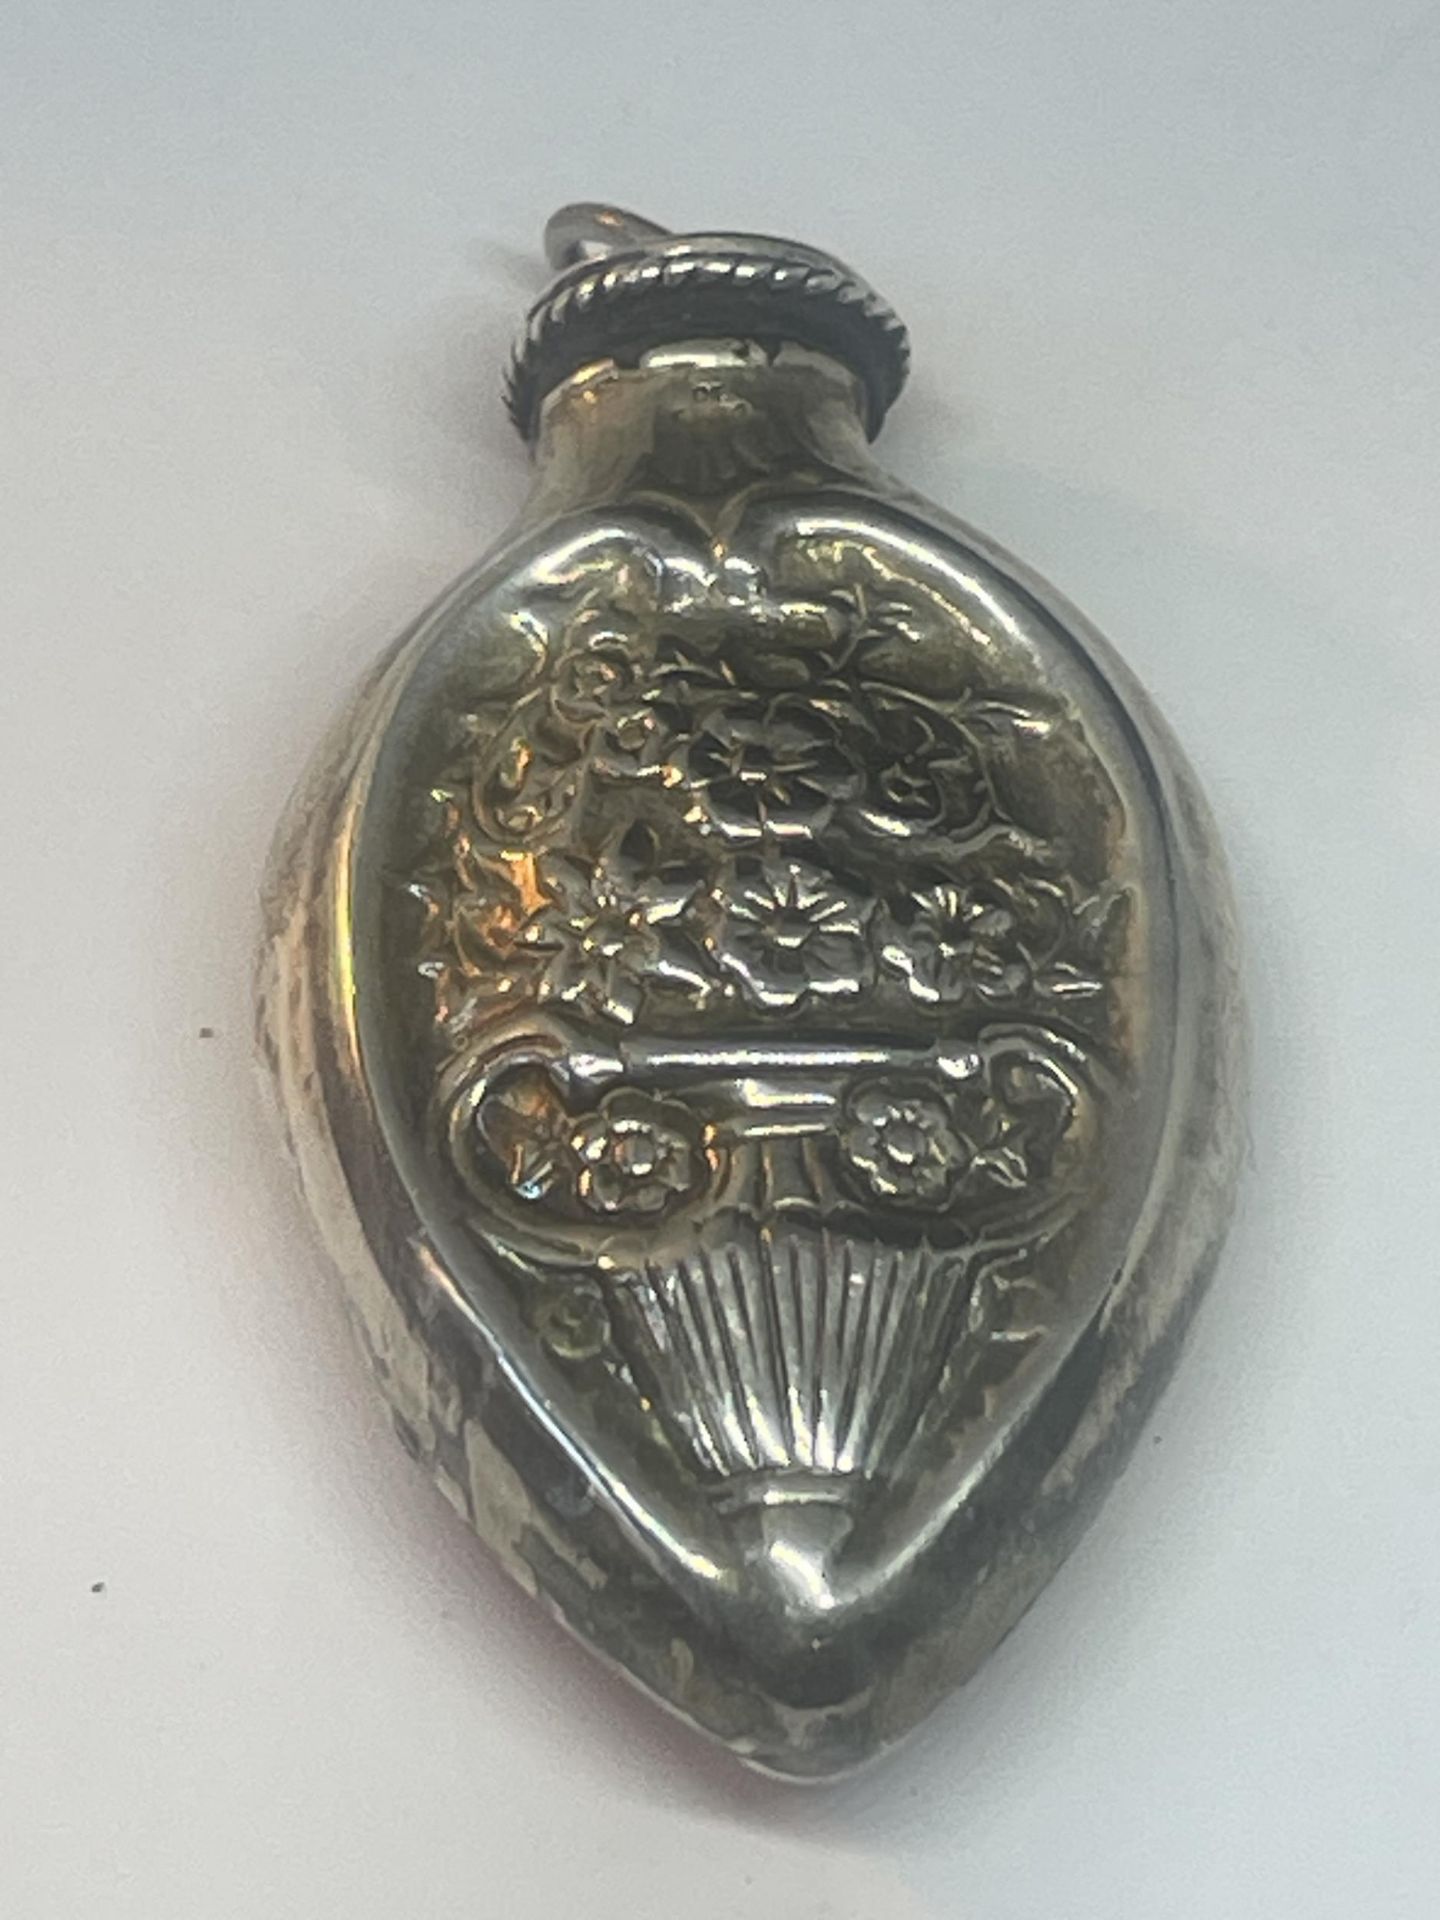 A DECORATIVE MARKED SILVER MOUNTED BOTTLE PENDANT - Image 2 of 3